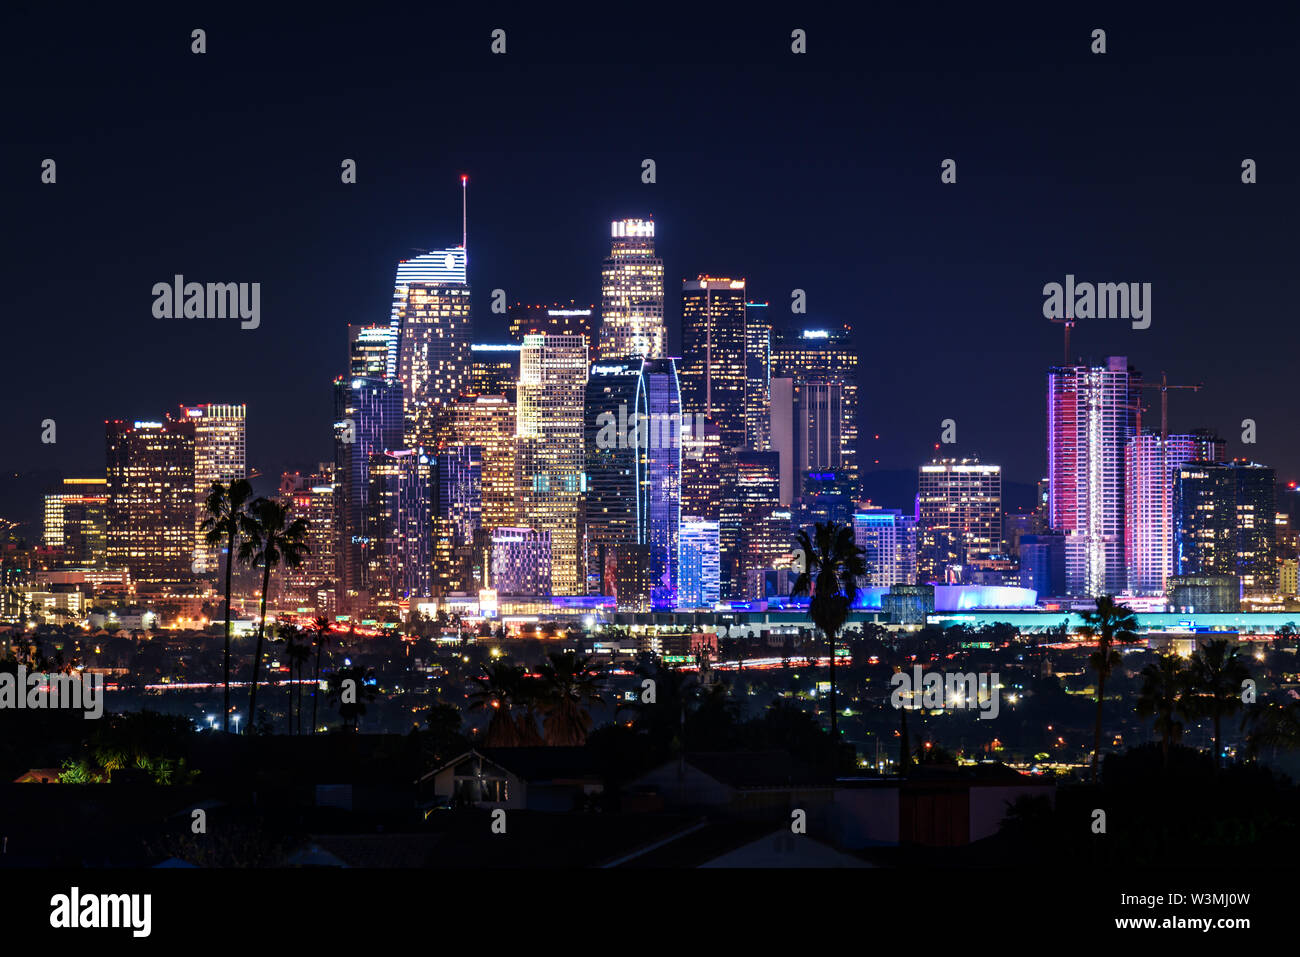 Downtown Los Angeles skyline at night Stock Photo